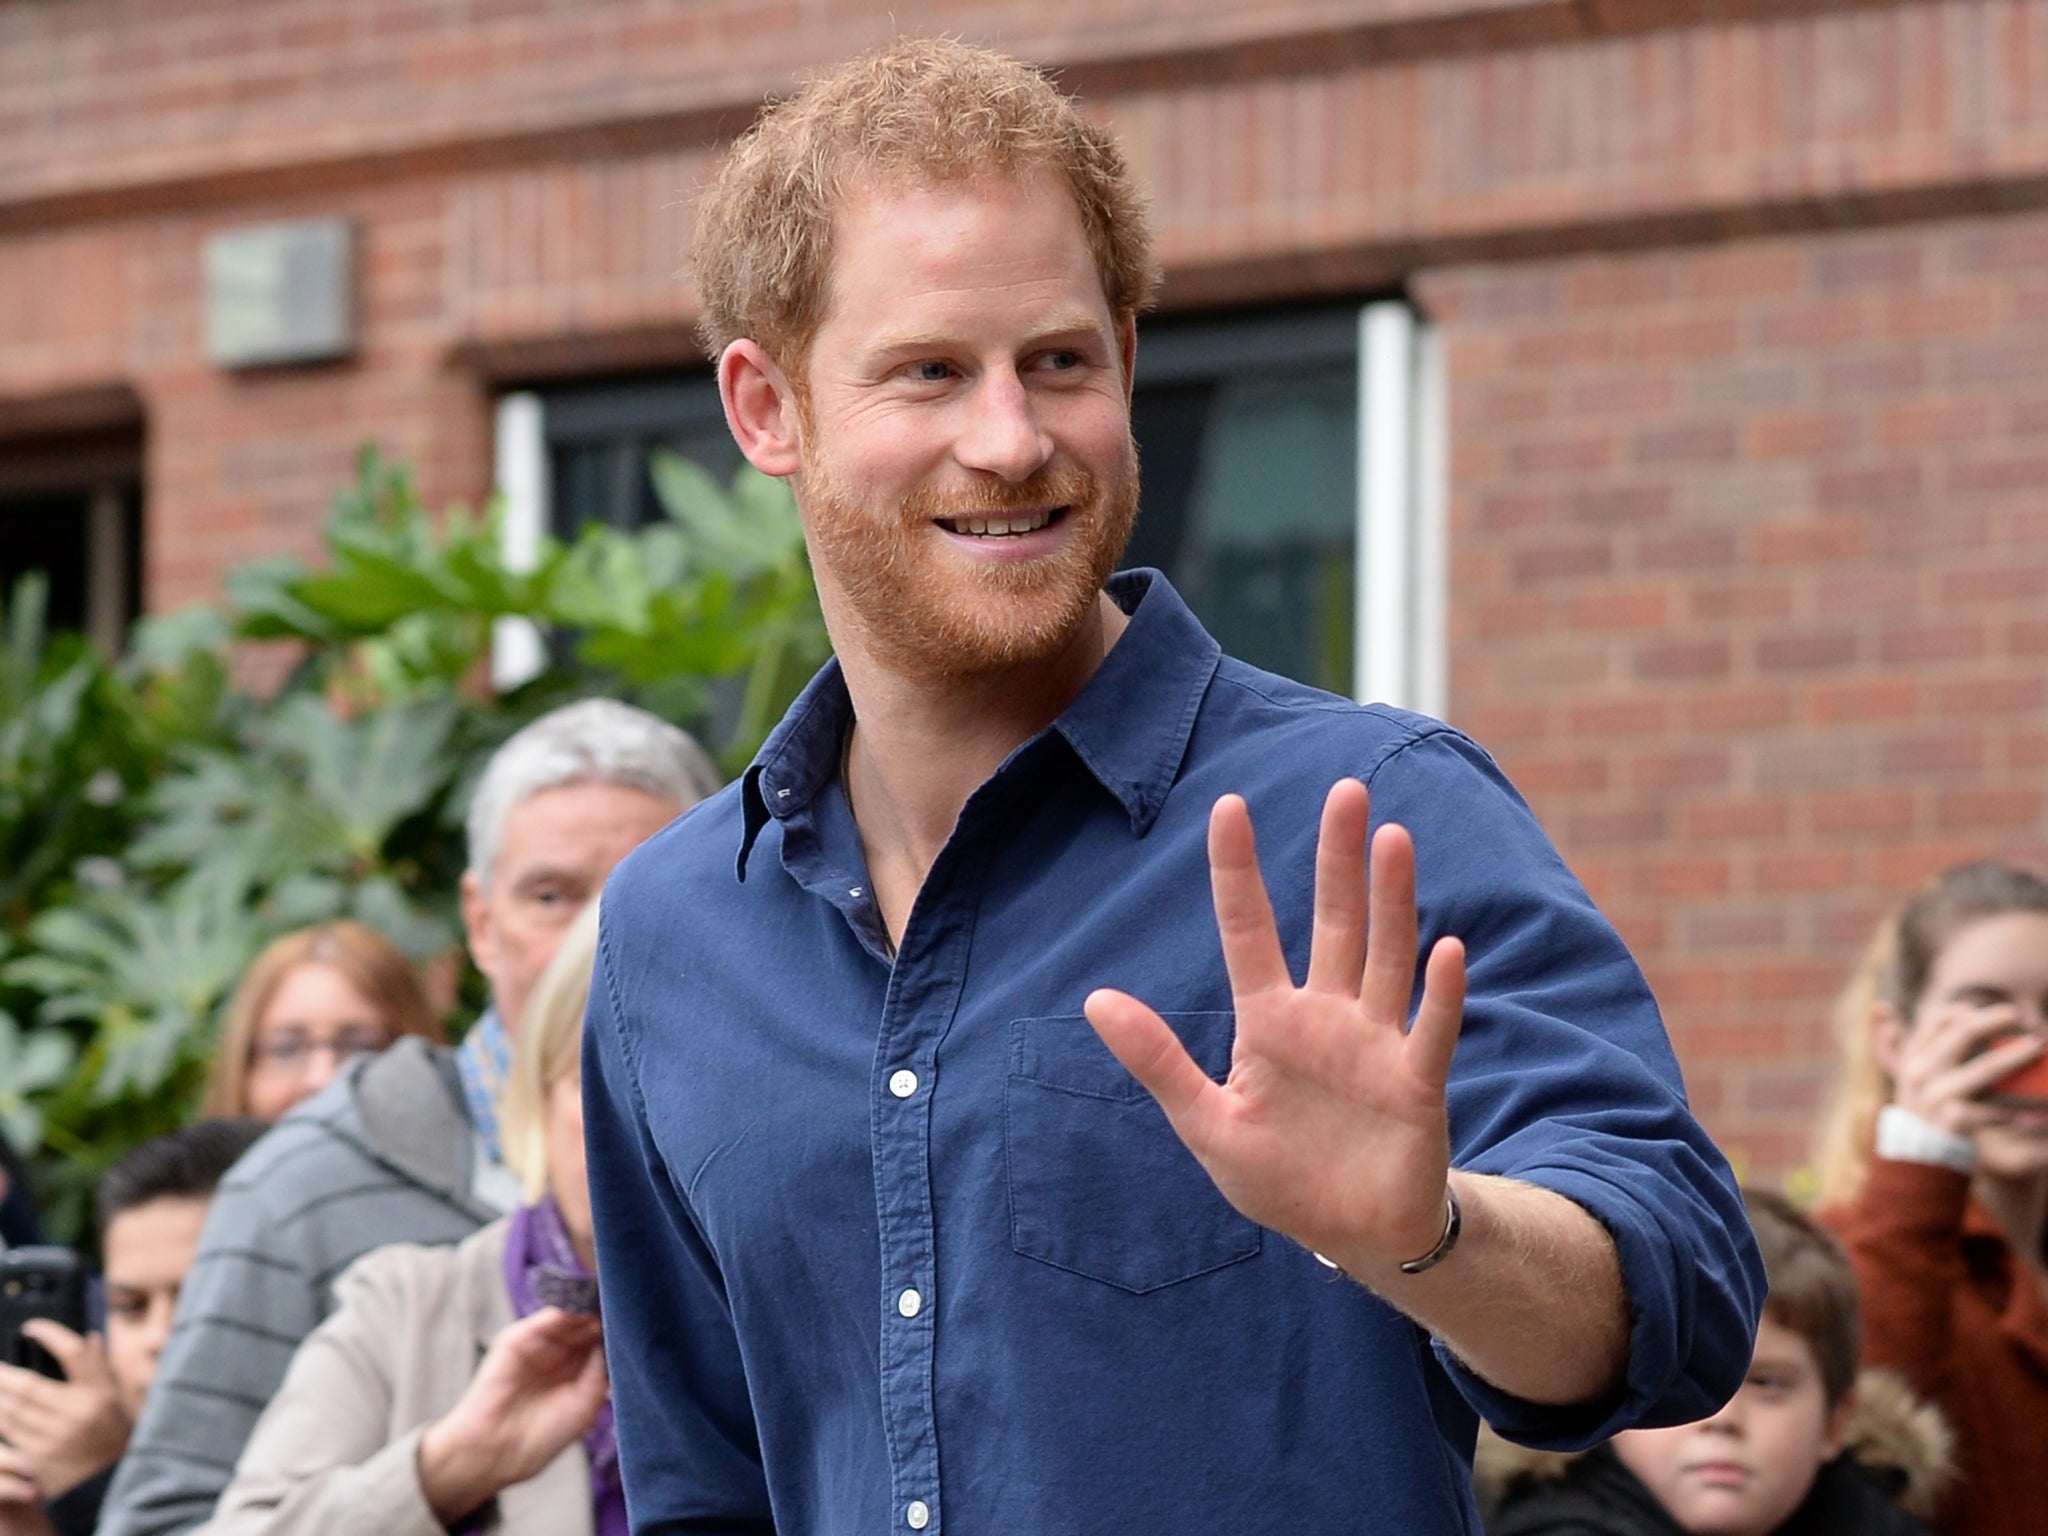 The man, whose name has not been publicised, claimed to be a friend of Prince Harry (pictured)